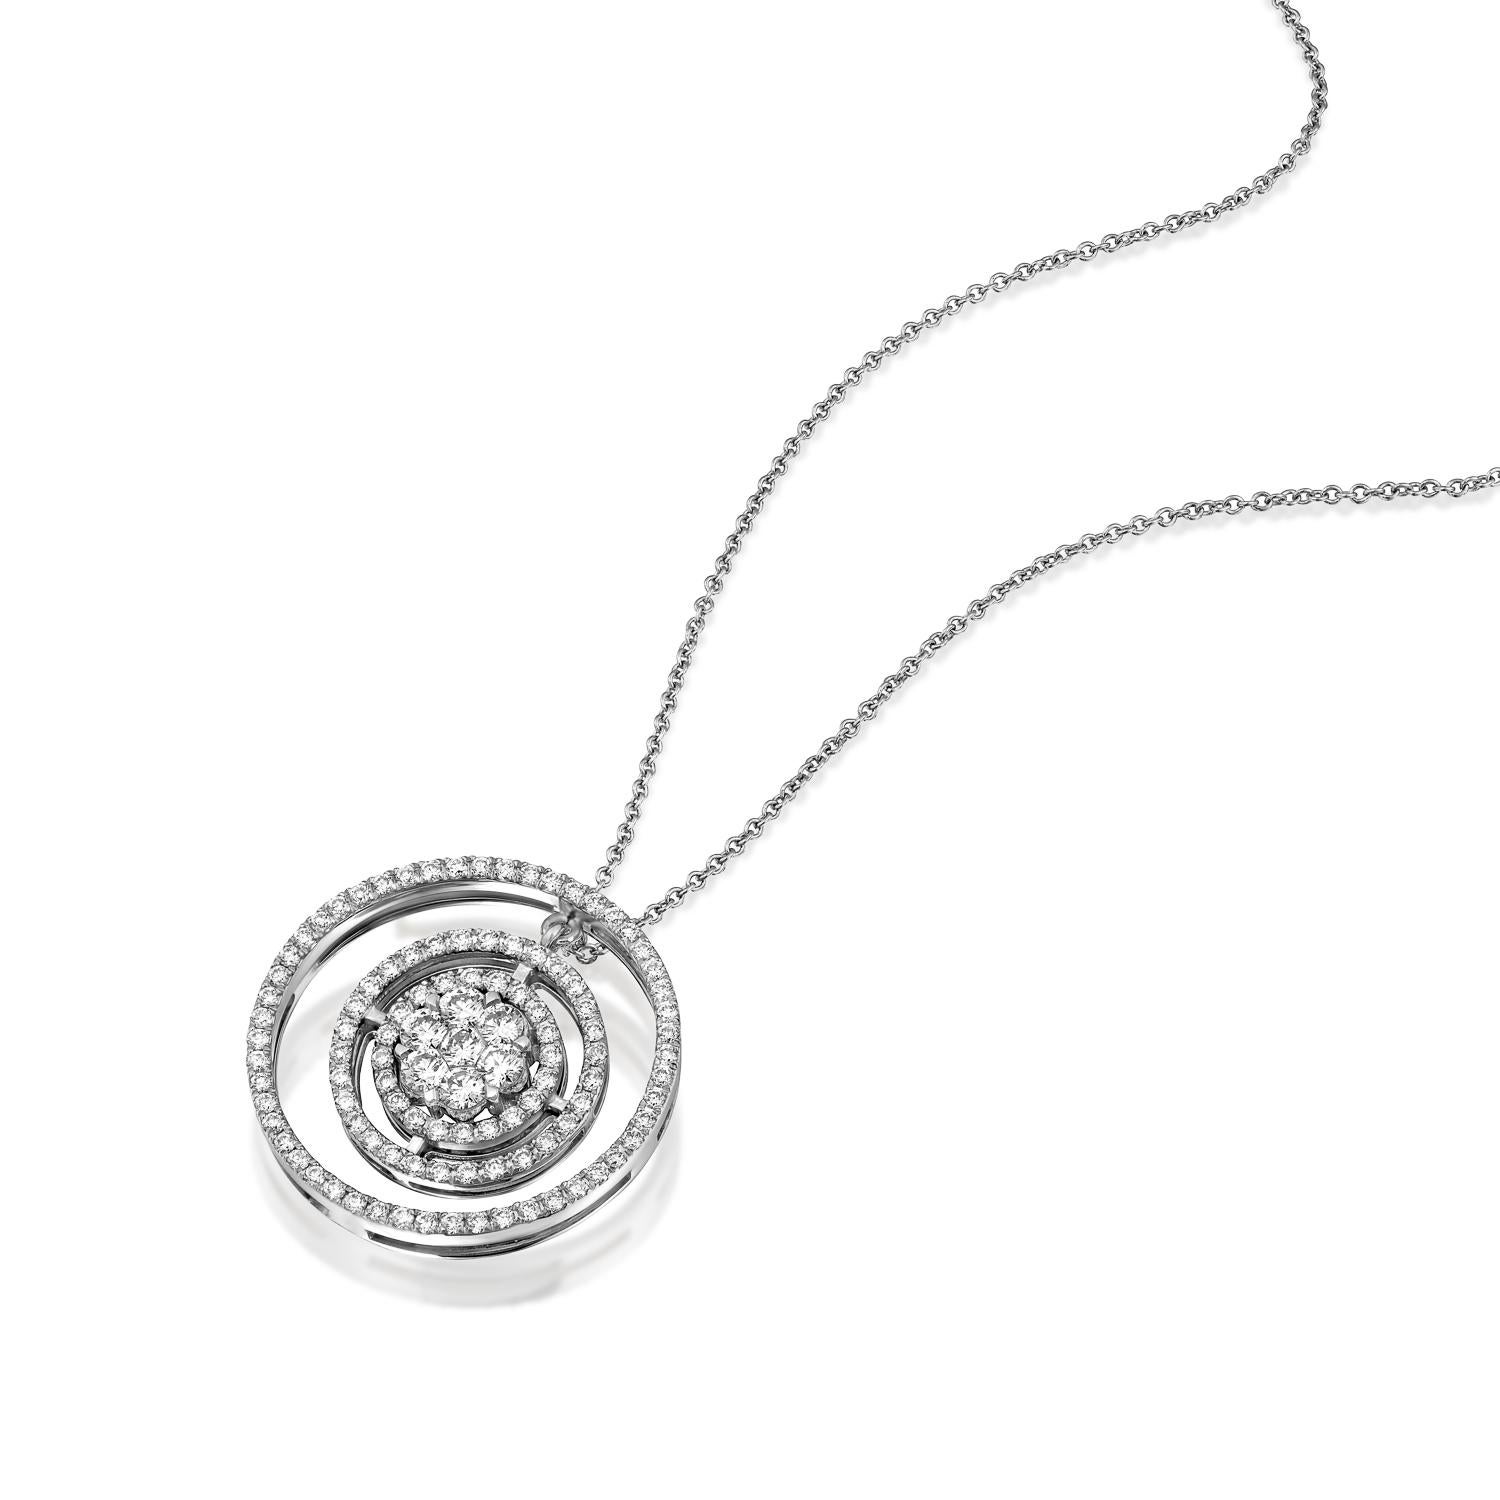 Introducing our Exquisite Geraldo 1.3 Carat Diamond White Gold Pendant:

Make a statement of refined elegance with our Geraldo 1.3 Carat Diamond White Gold Pendant. This exquisite pendant showcases a stunning round diamond with a brilliant F/VS